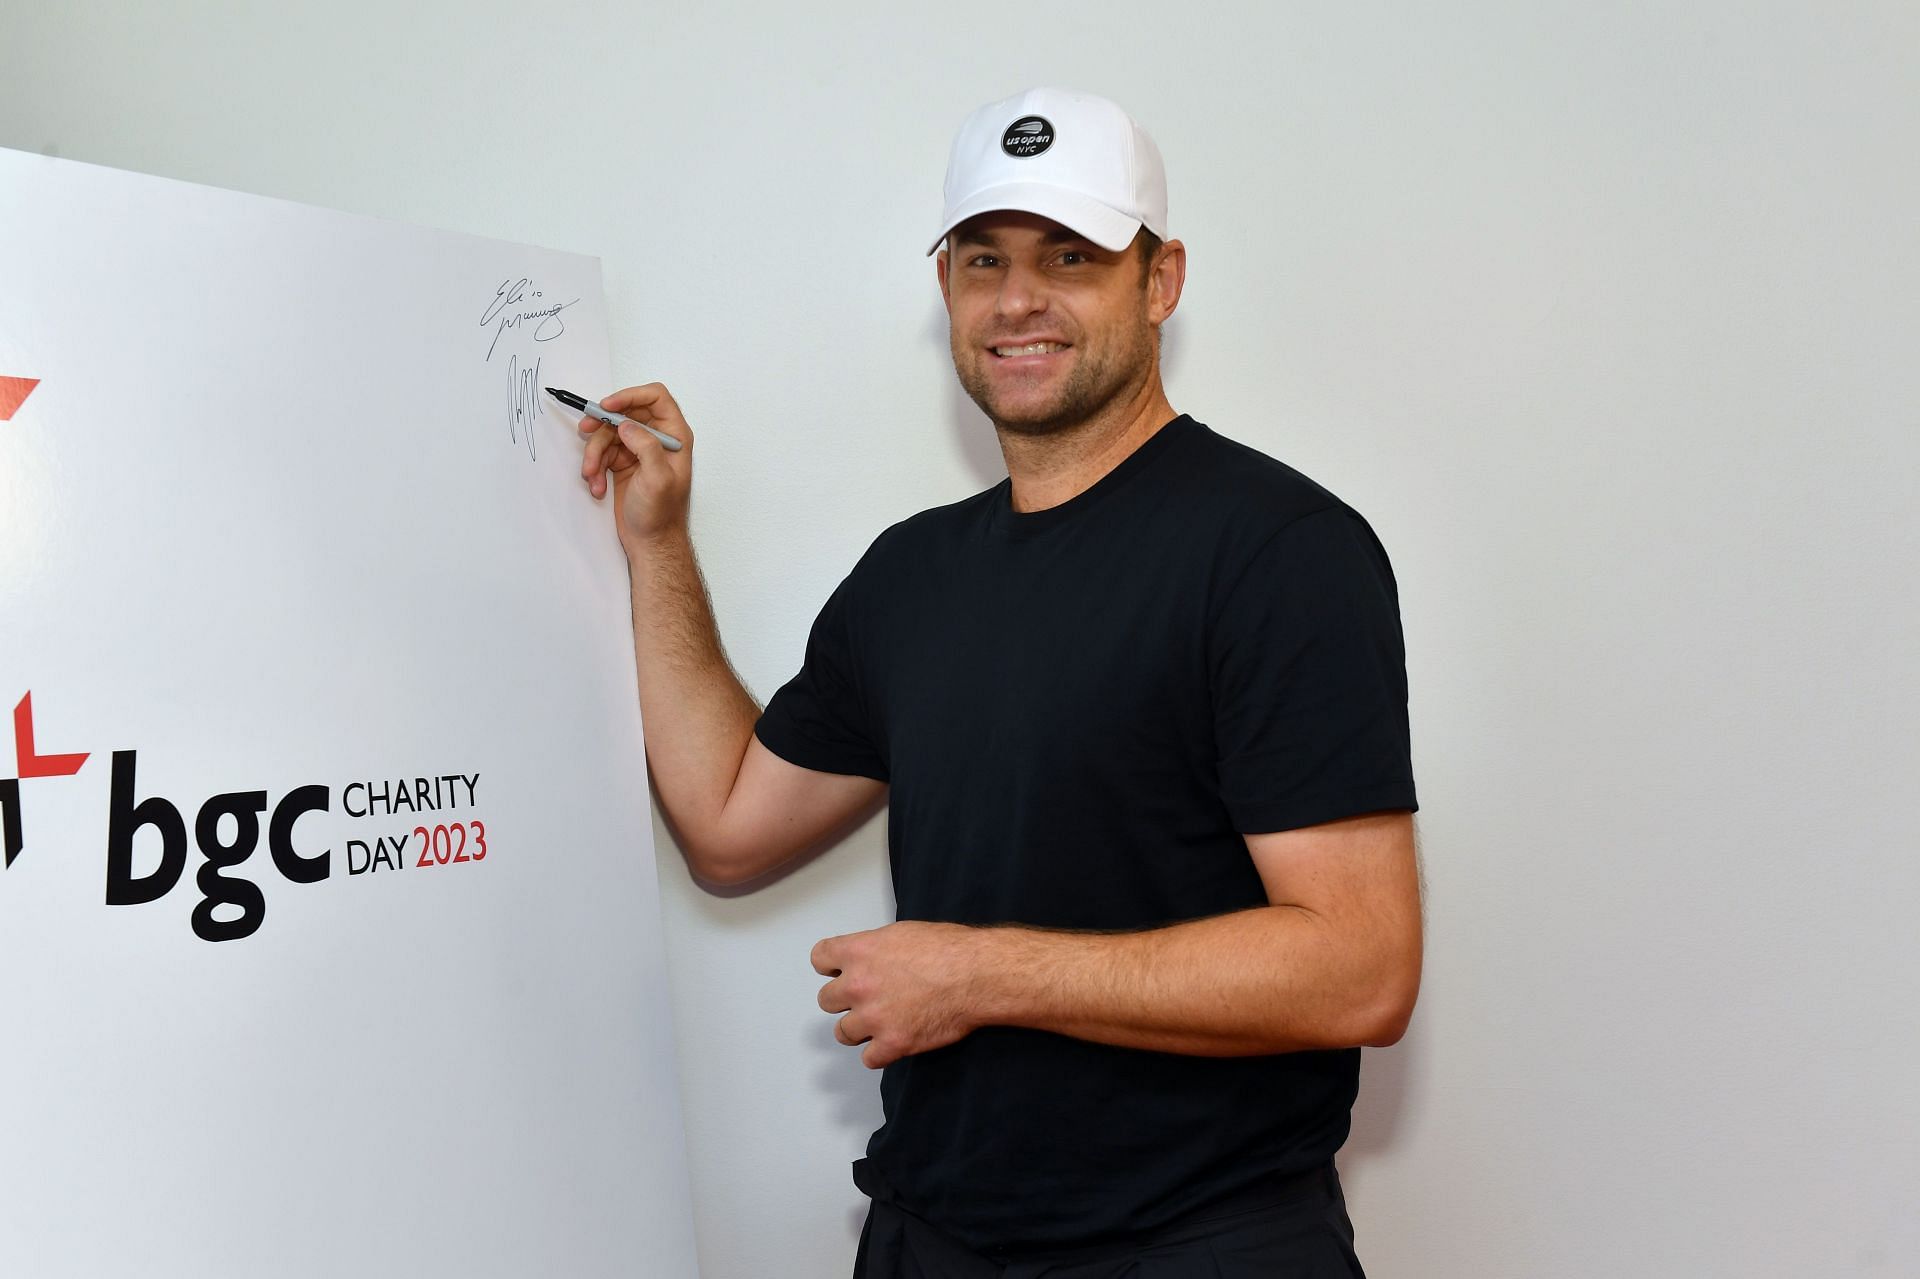 Andy Roddick at a charity event in 2023